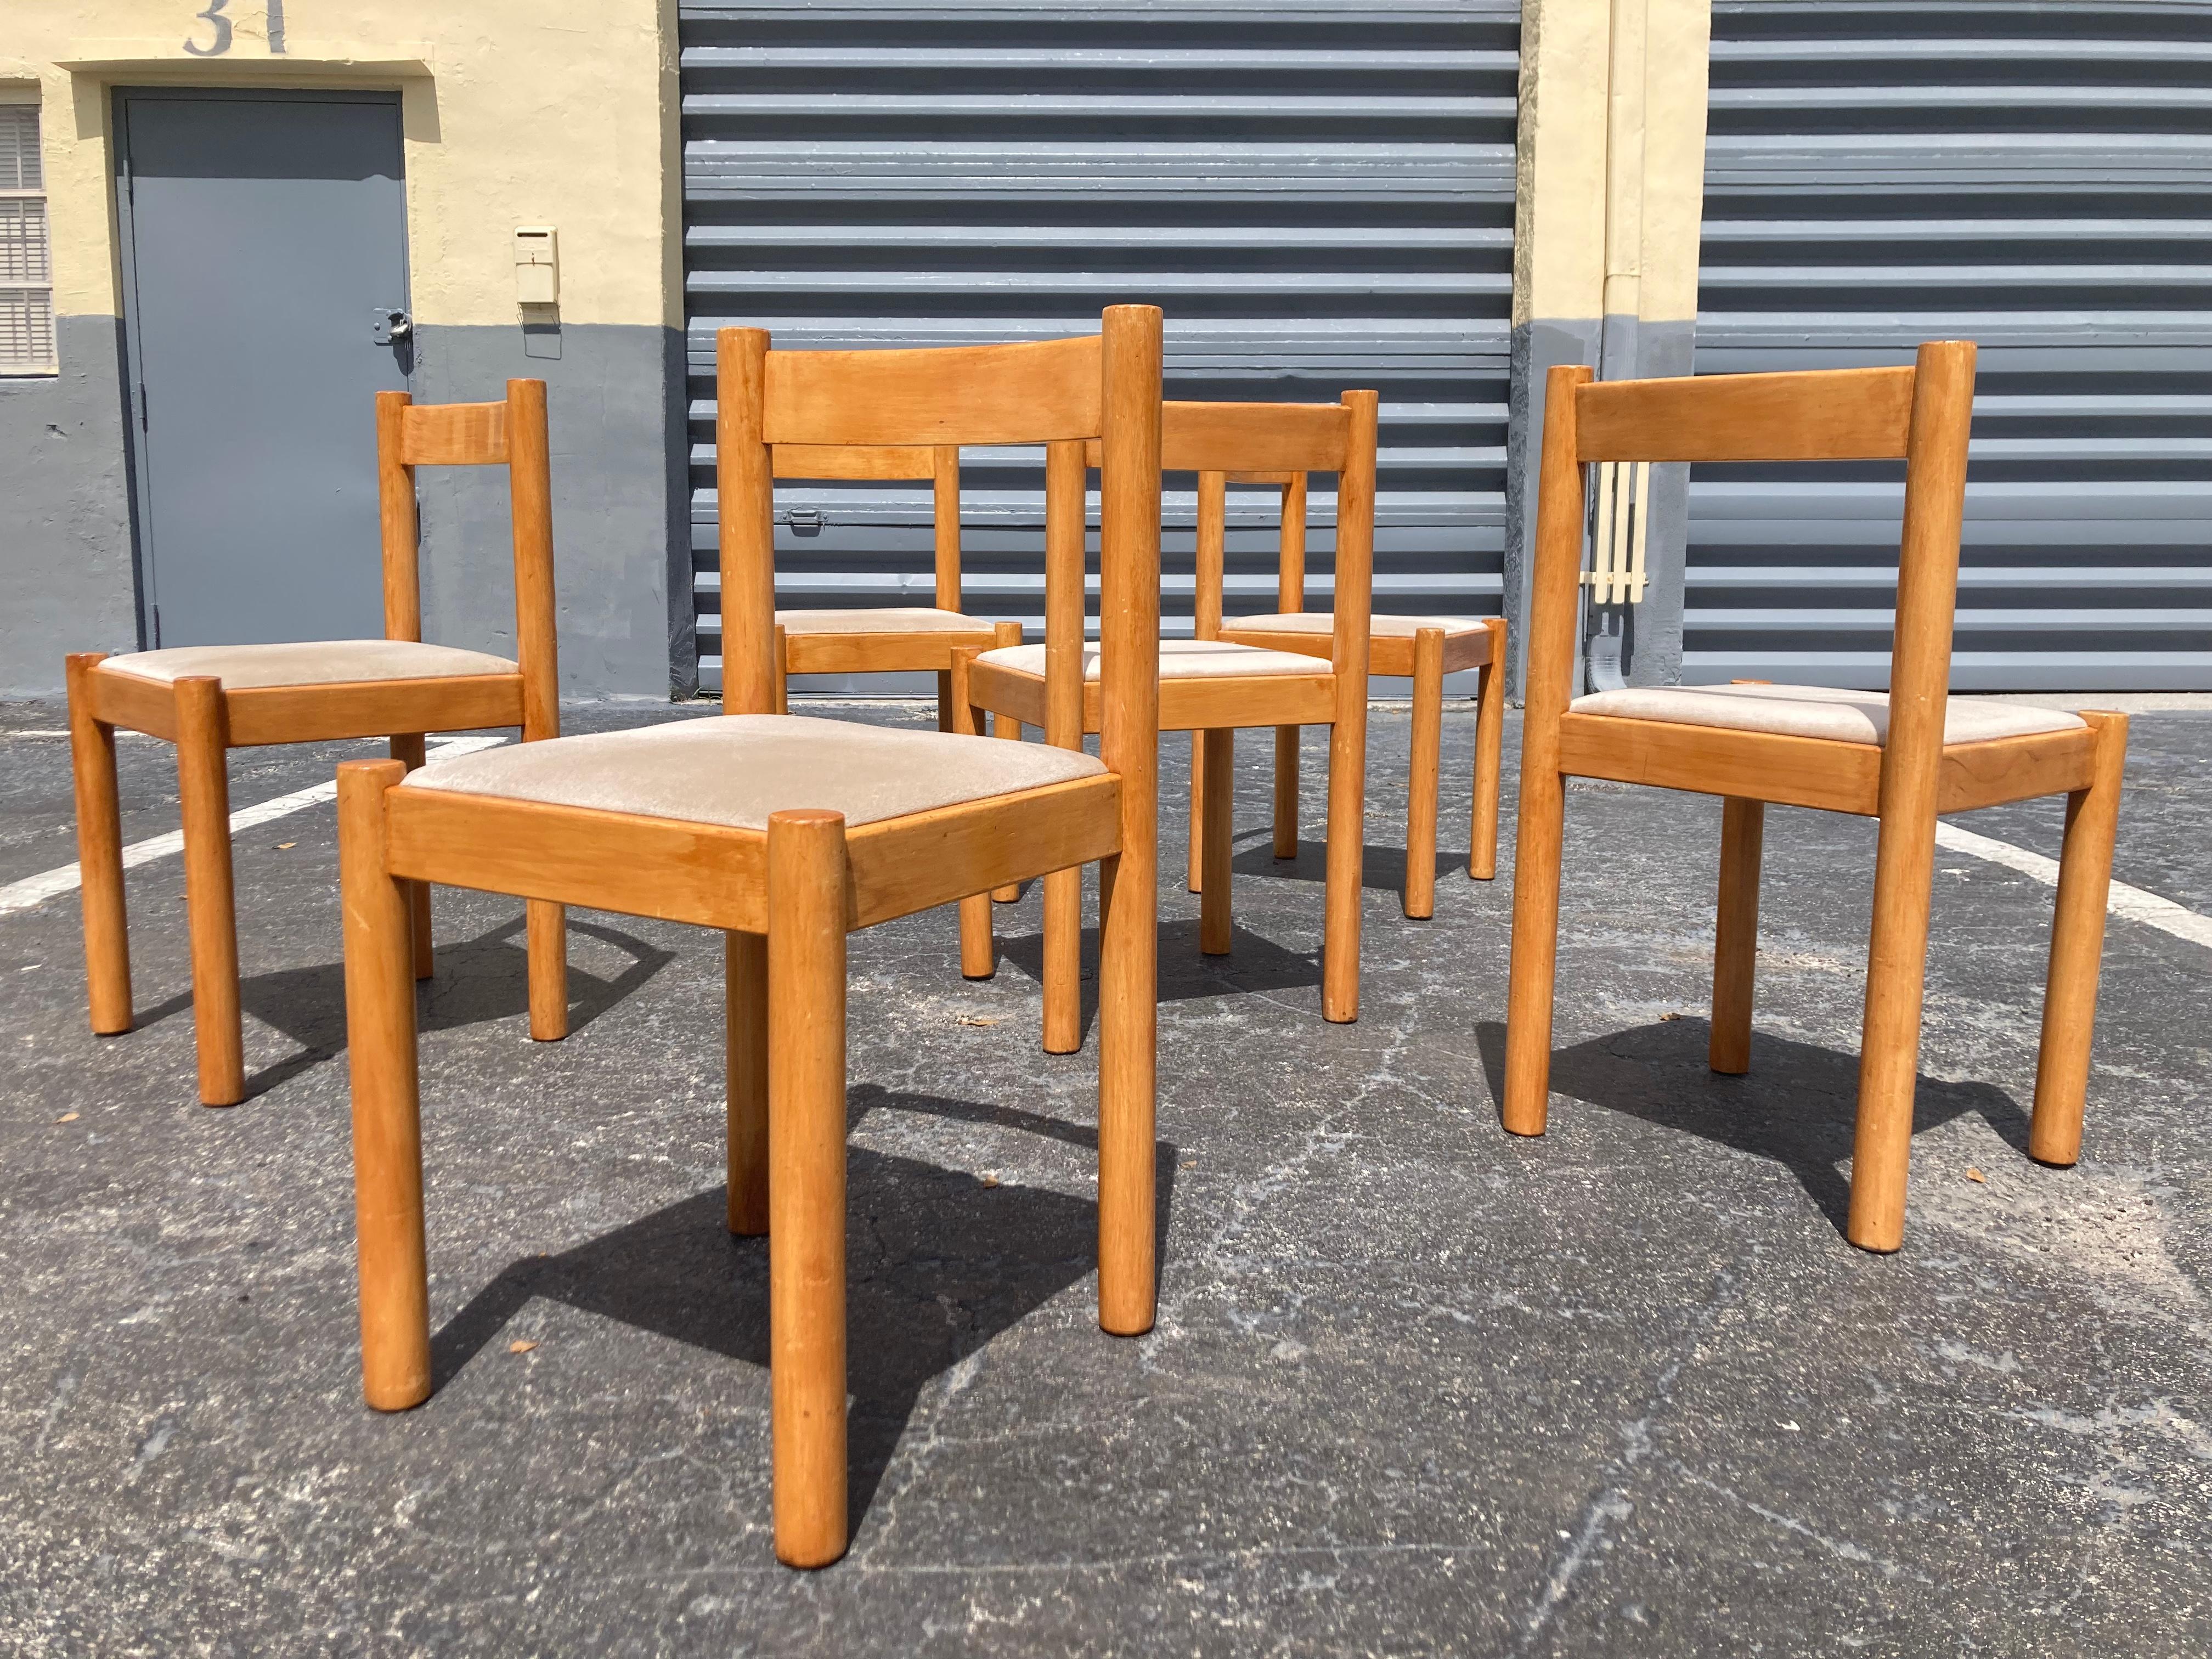 Set of Six Dining Chairs by Gordon International 1986. Solid birch wood with fabric seats. Seats should be recovered, we can help. Finish on wood is uneven.